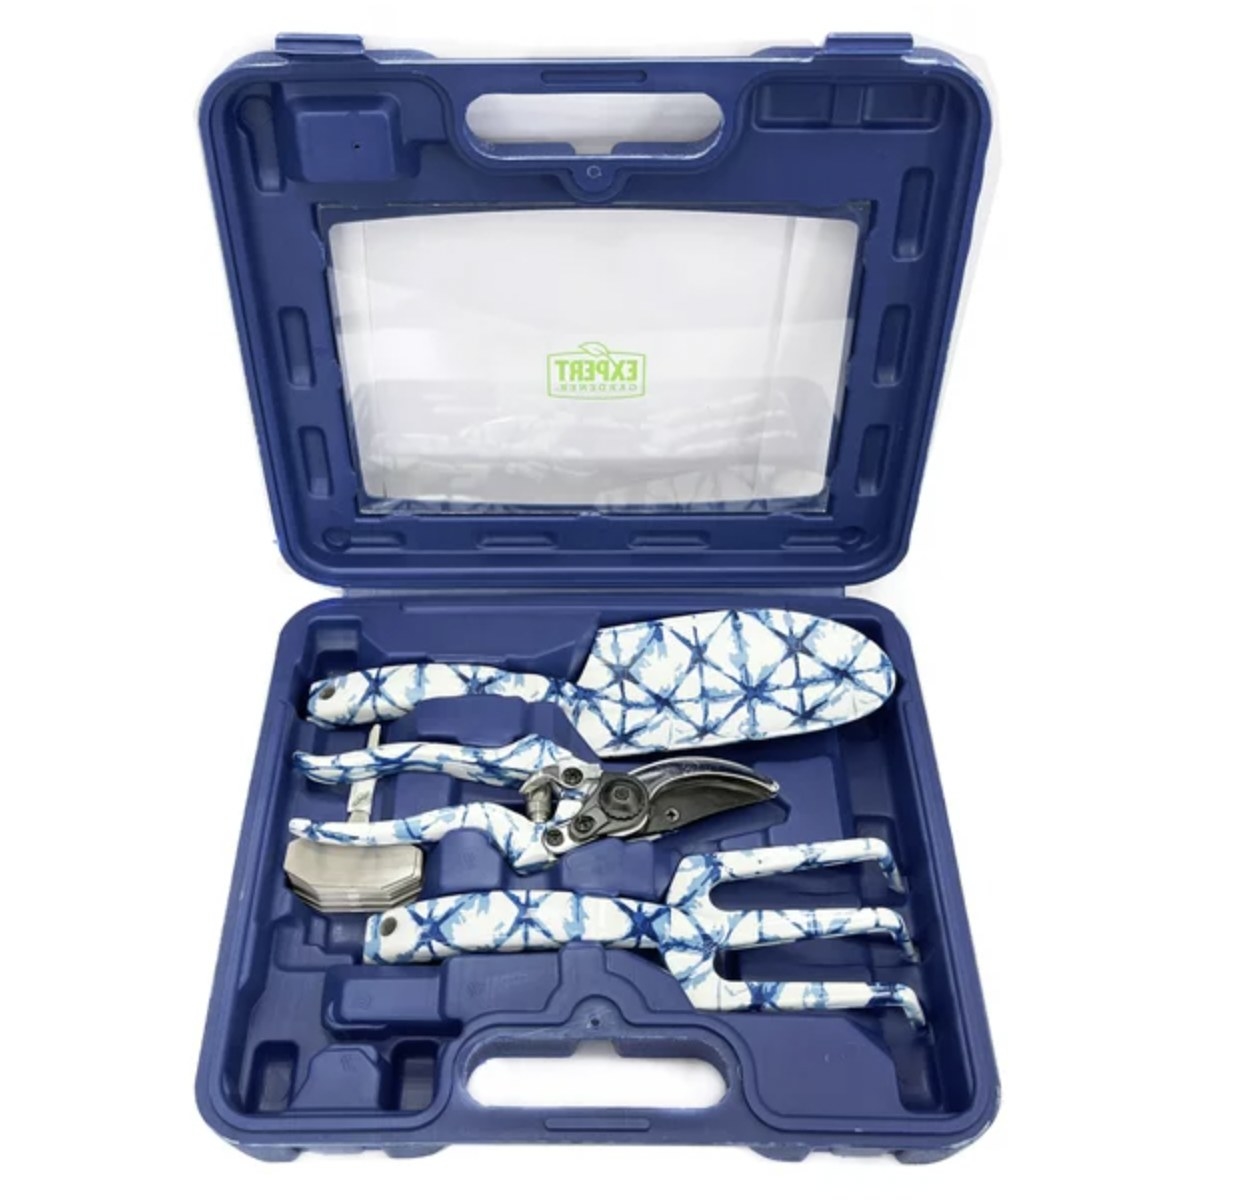 A set of gardening tools in a blue box